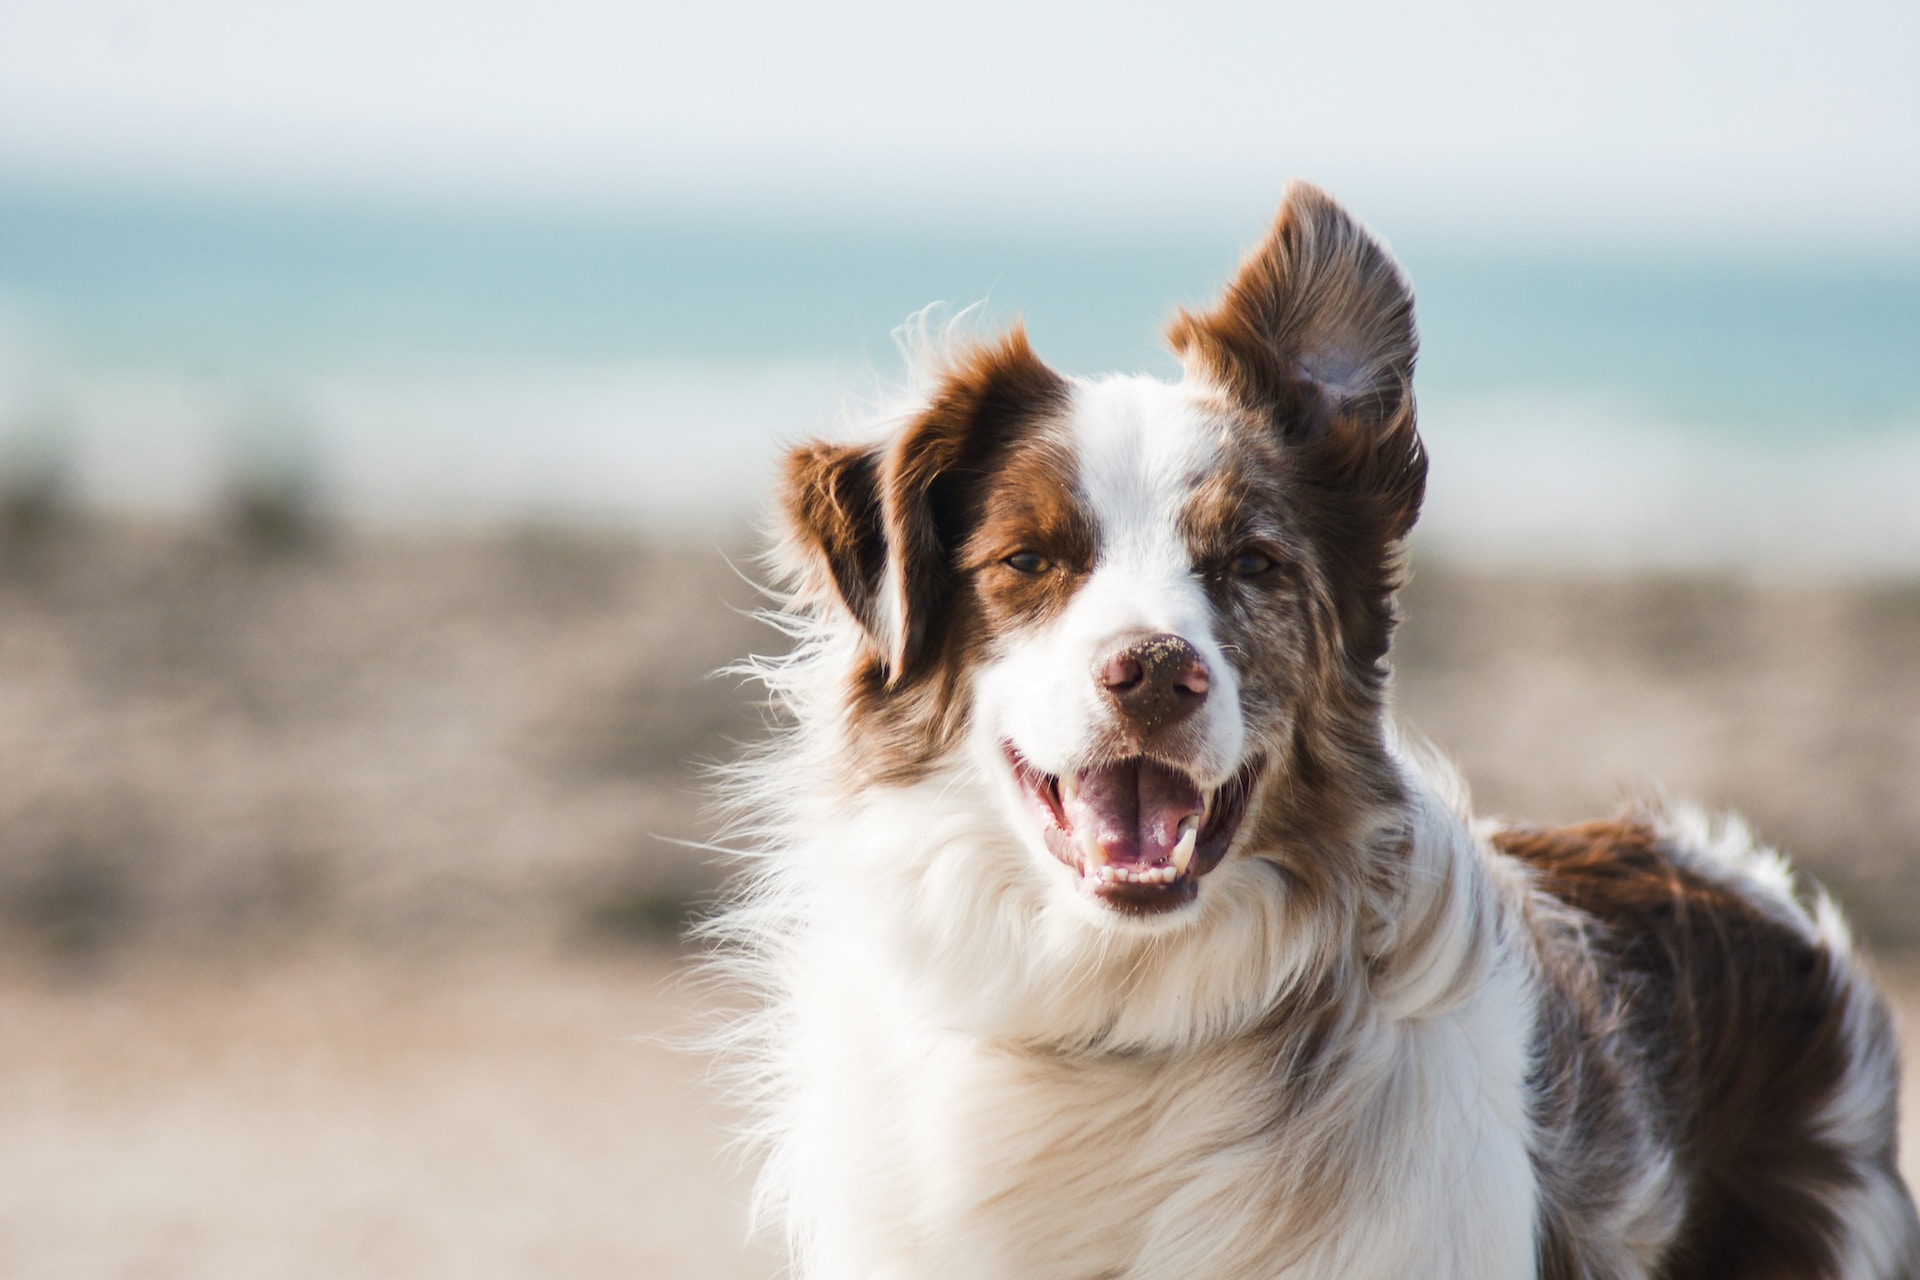 brown and white dog standing on windy beach